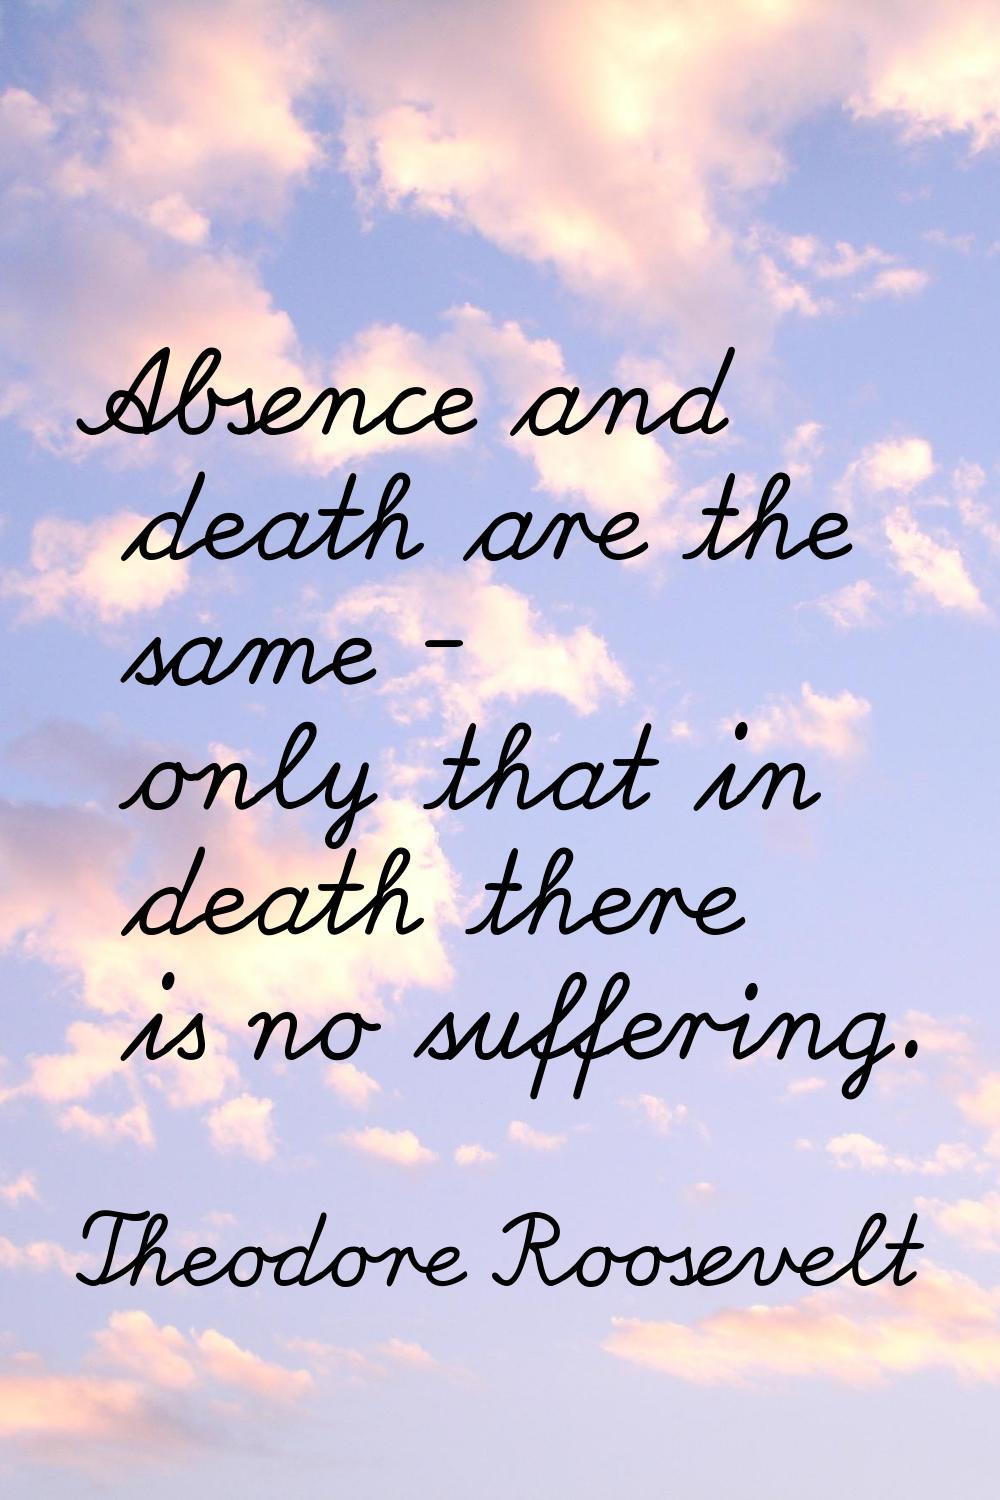 Absence and death are the same - only that in death there is no suffering.